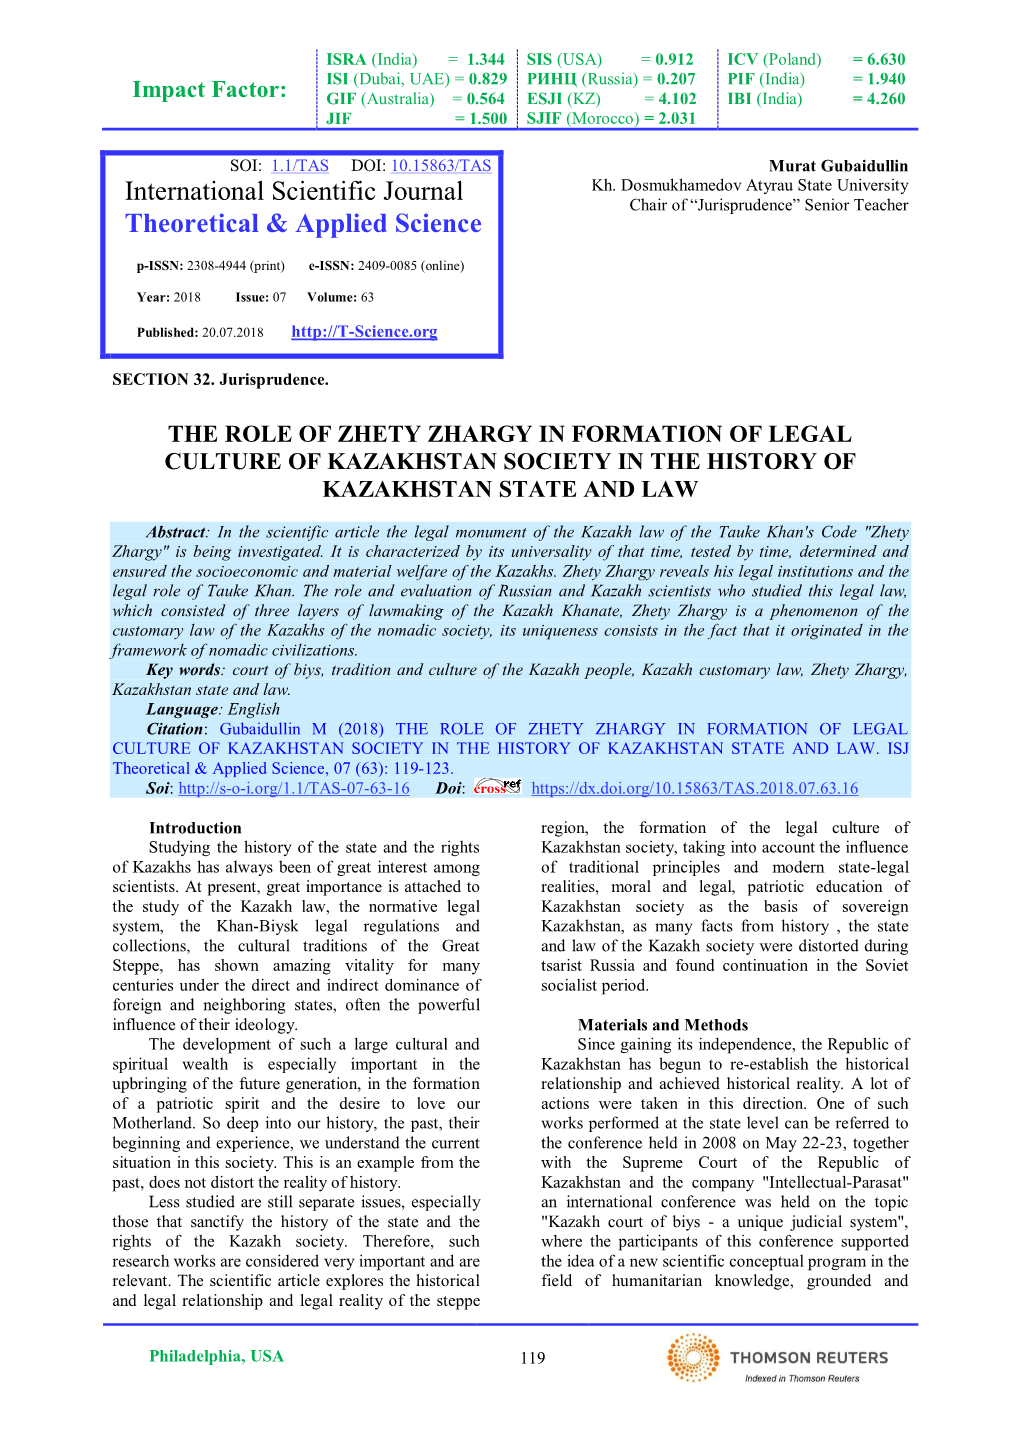 The Role of Zhety Zhargy in Formation of Legal Culture of Kazakhstan Society in the History of Kazakhstan State and Law